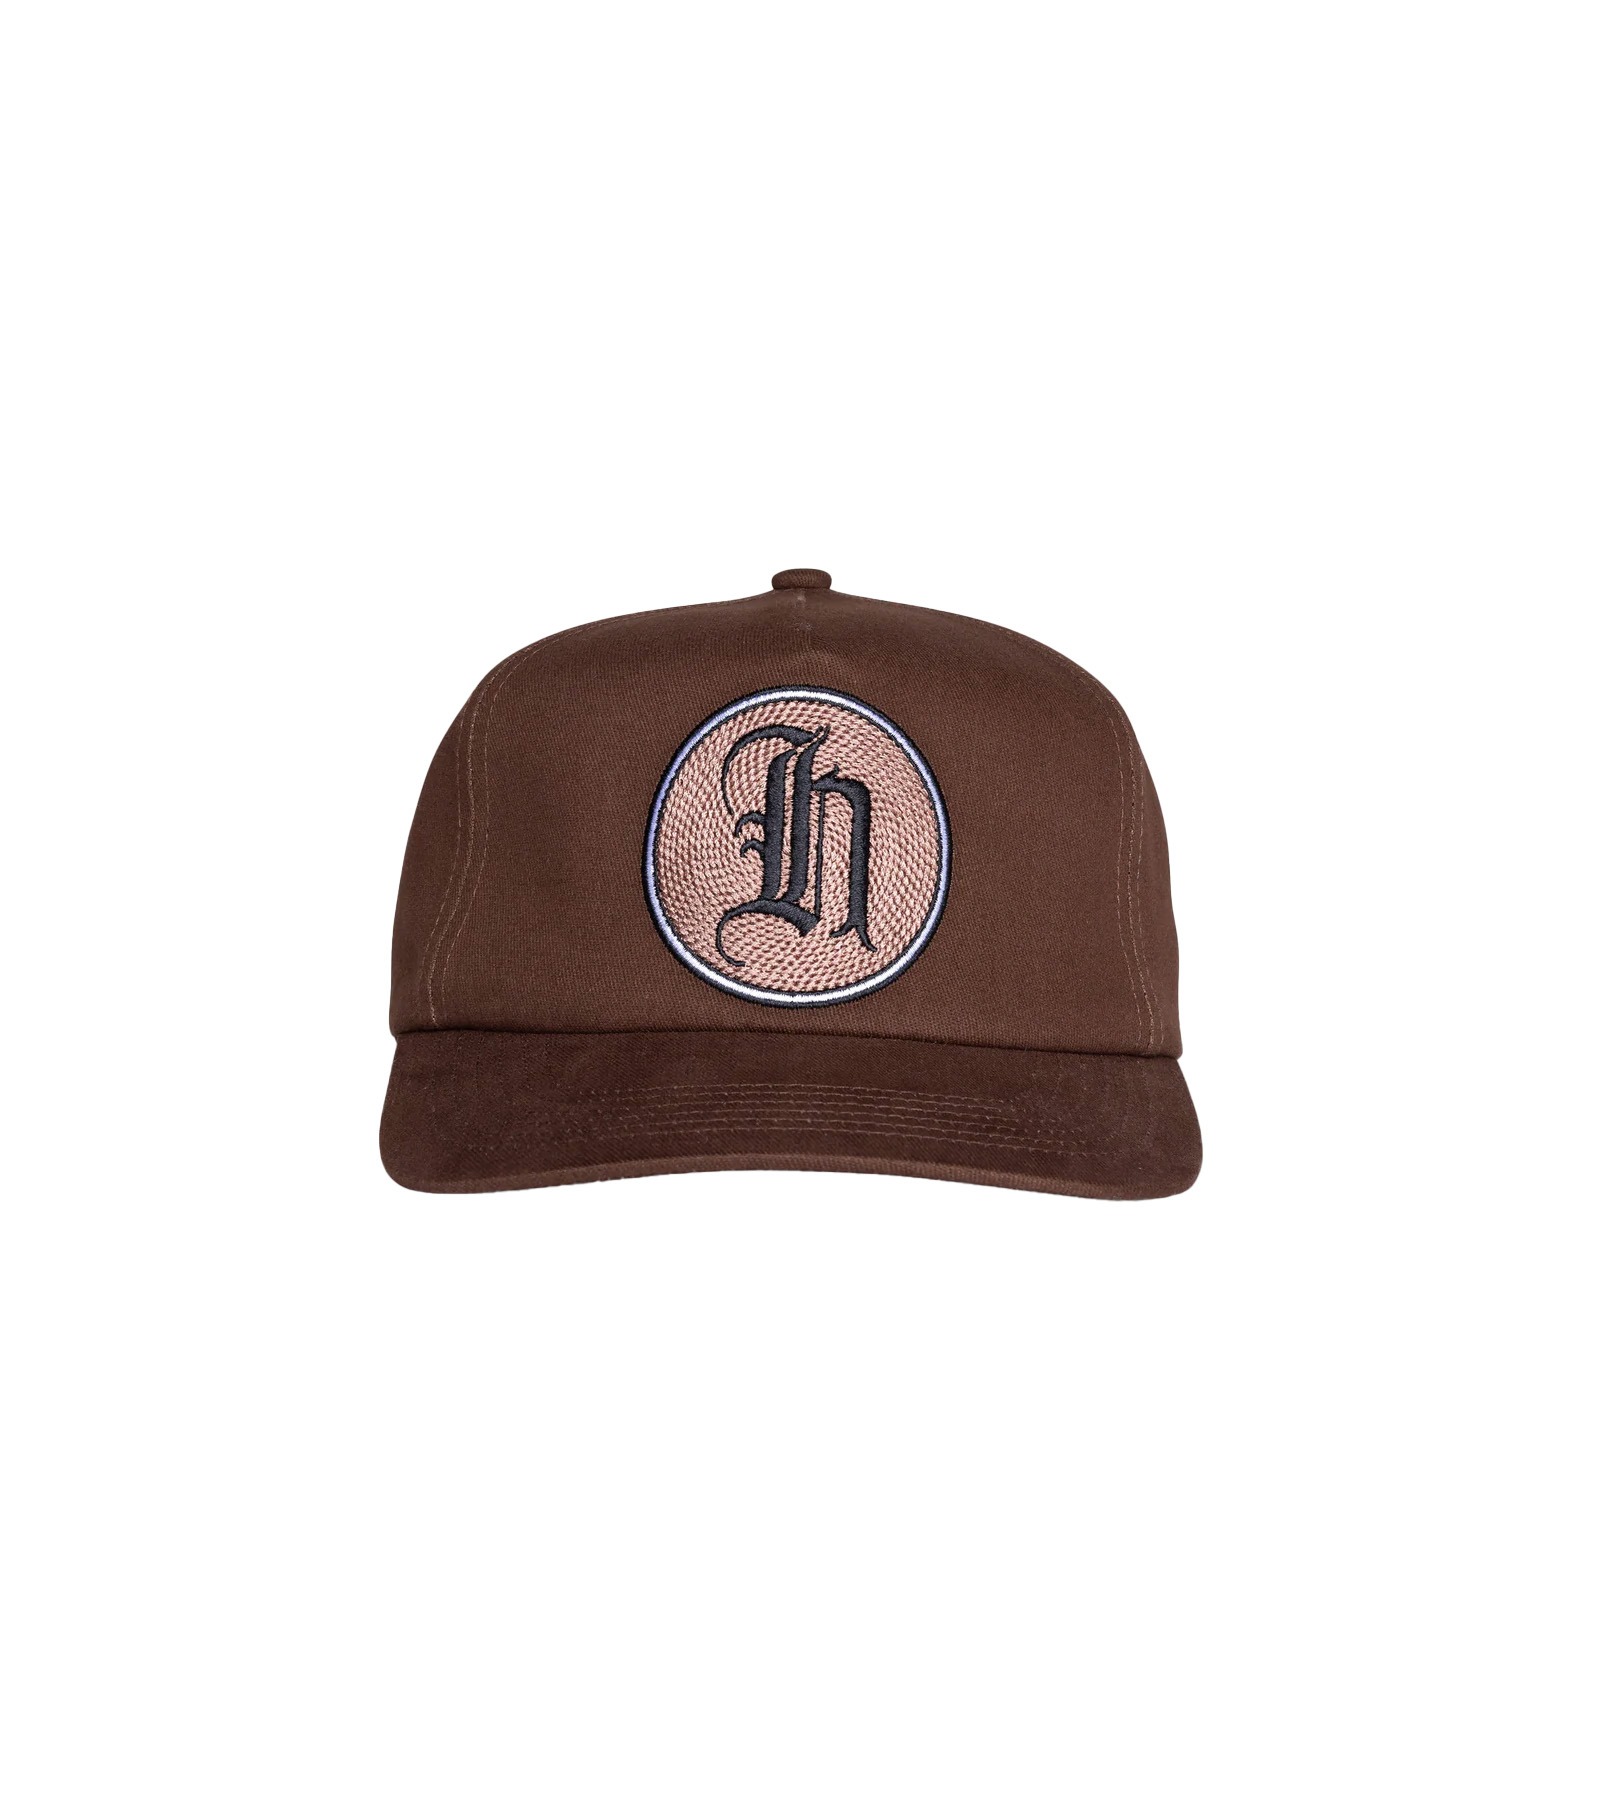 H PATCH HAT (BROWN)